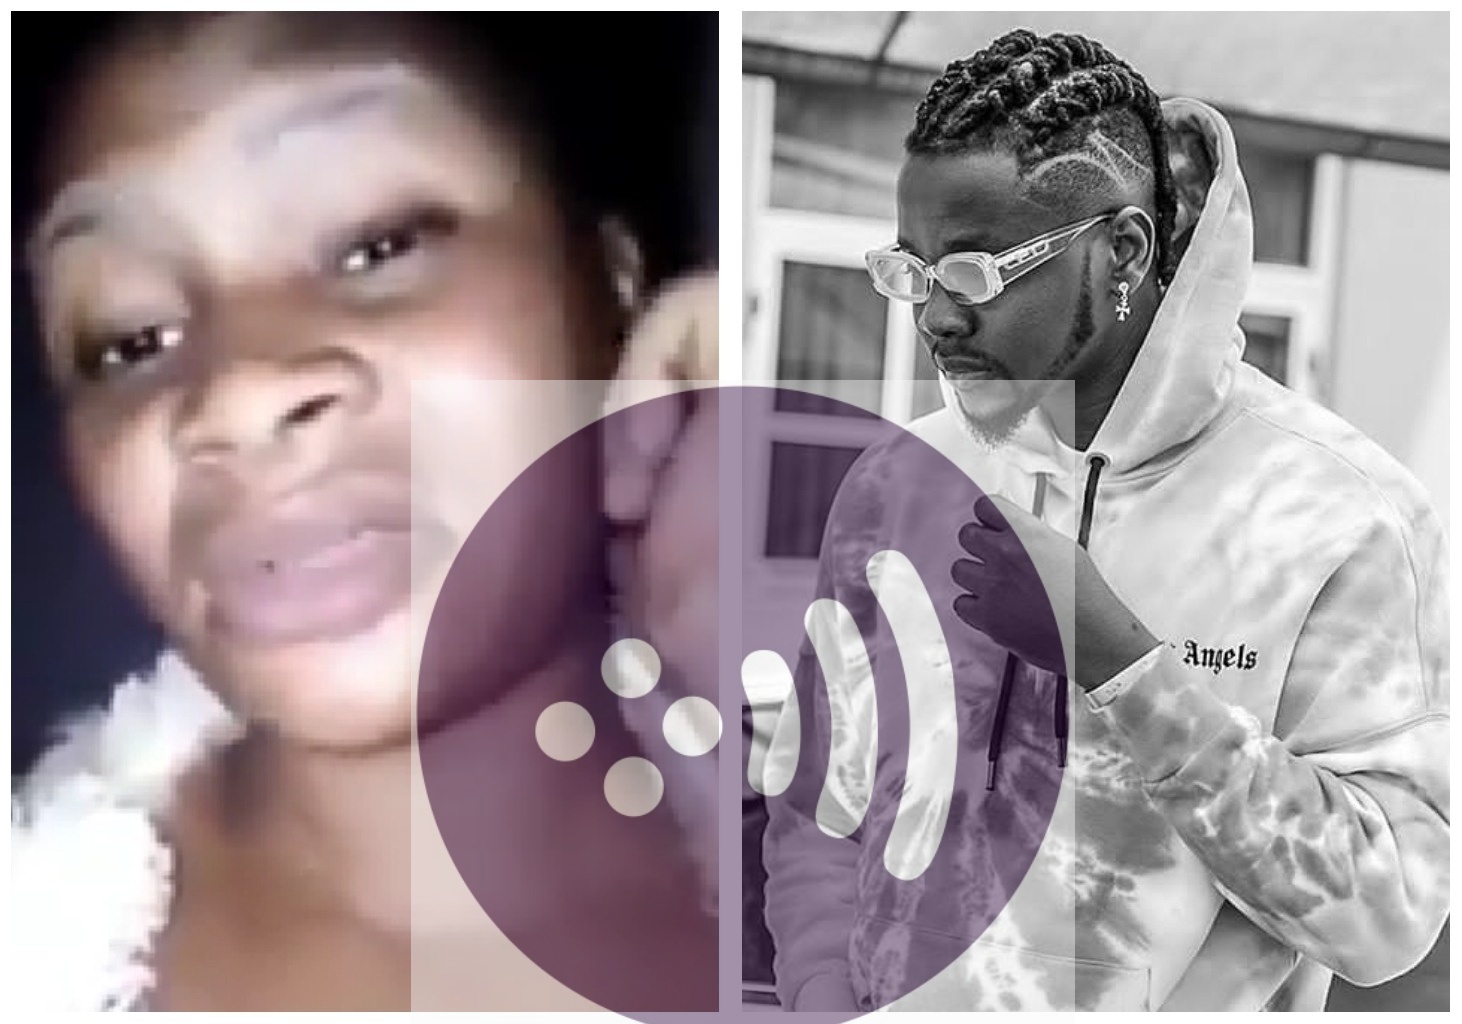 "I want to have a one night stand with Kizz Daniel" – Nigeria lady cries out (Video)